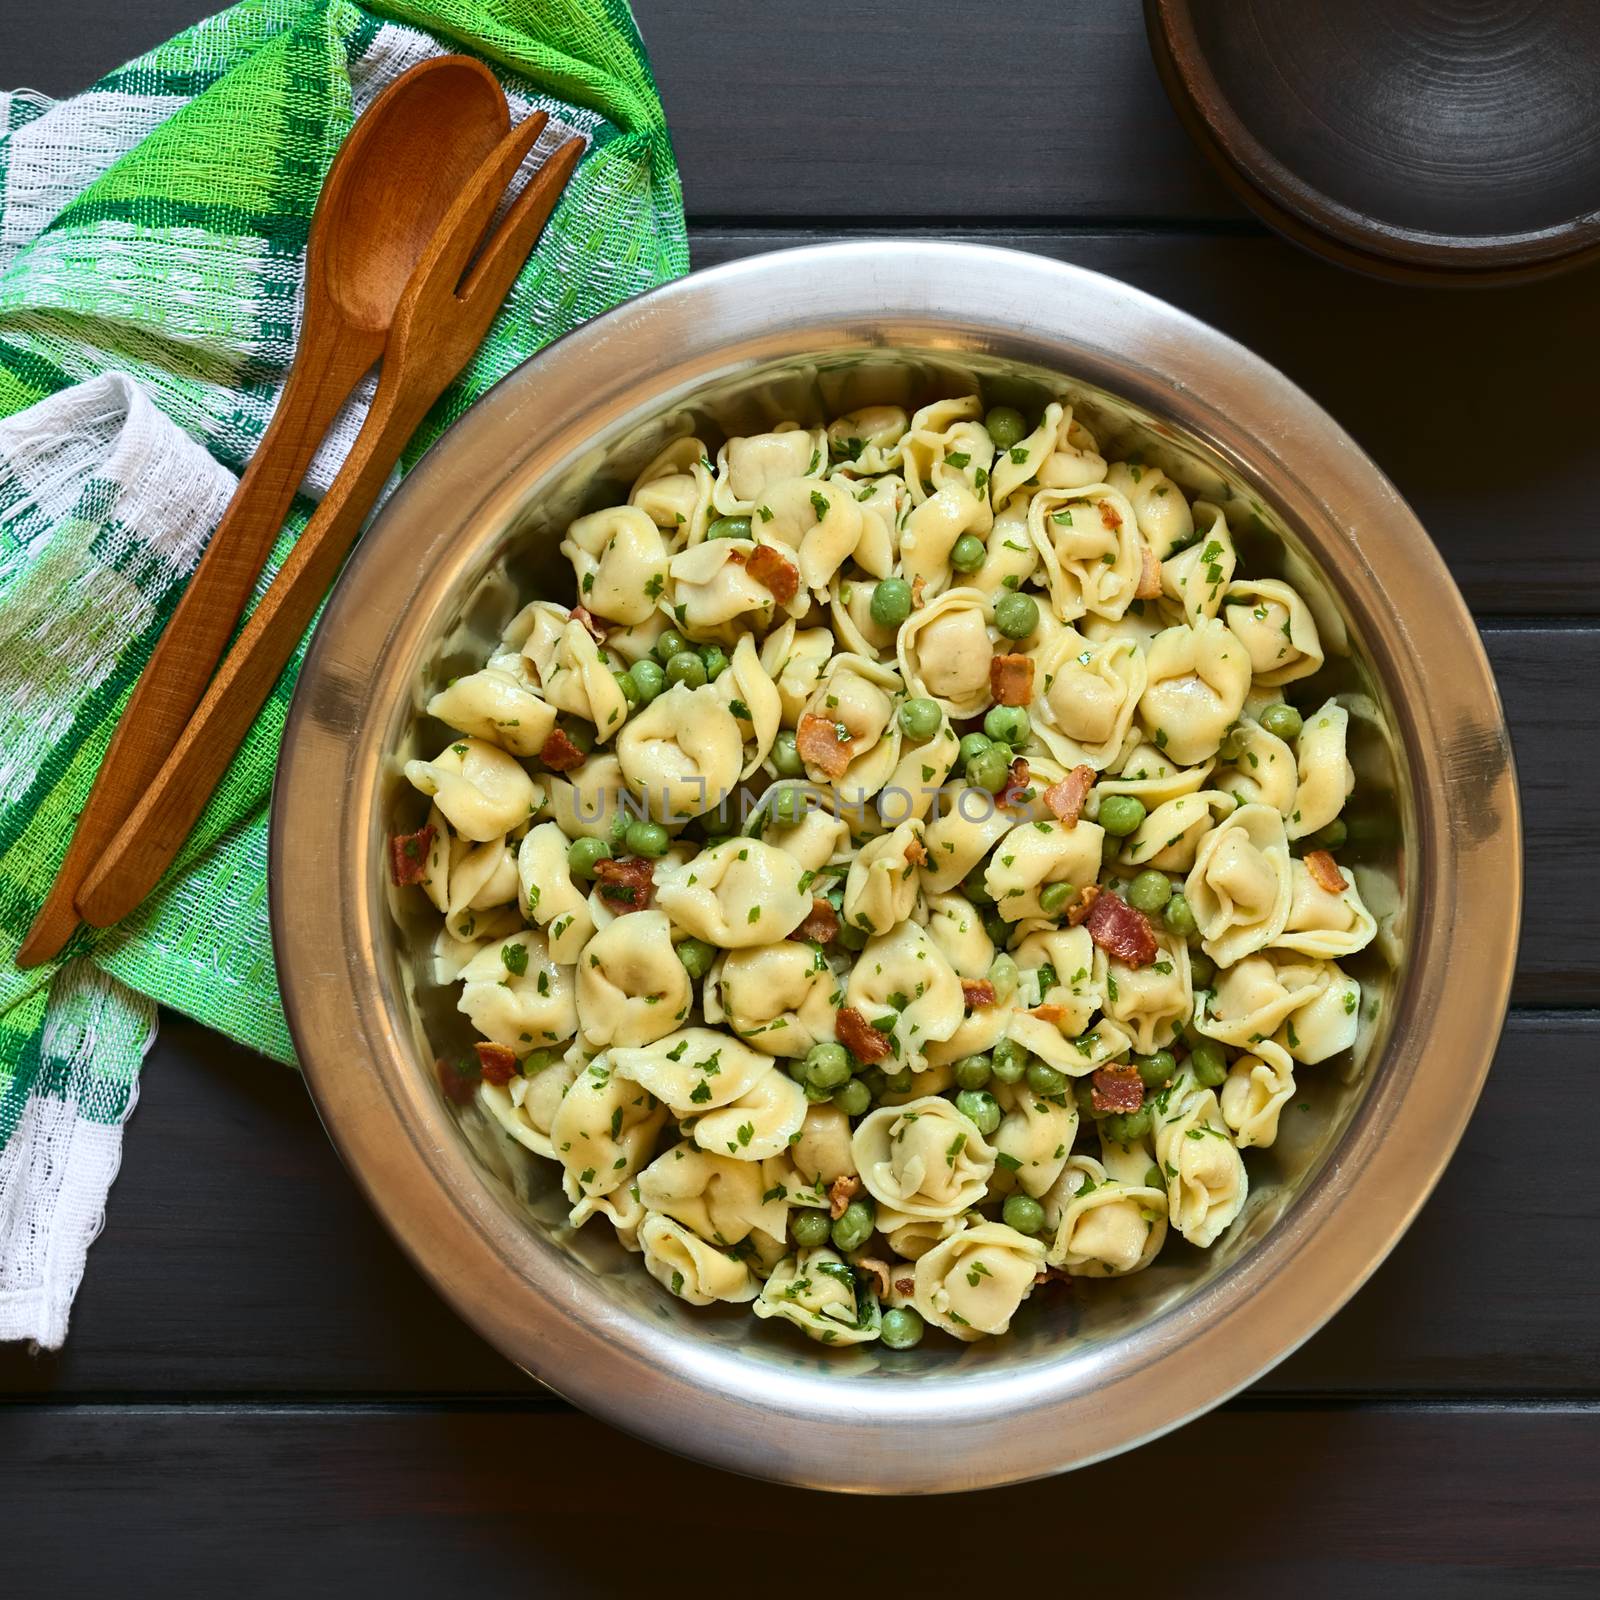 Tortellini salad with green peas, fried bacon and parsley in big salad bowl, with small rustic bowls, wooden spoon and fork on the side, photographed overhead on dark wood with natural light